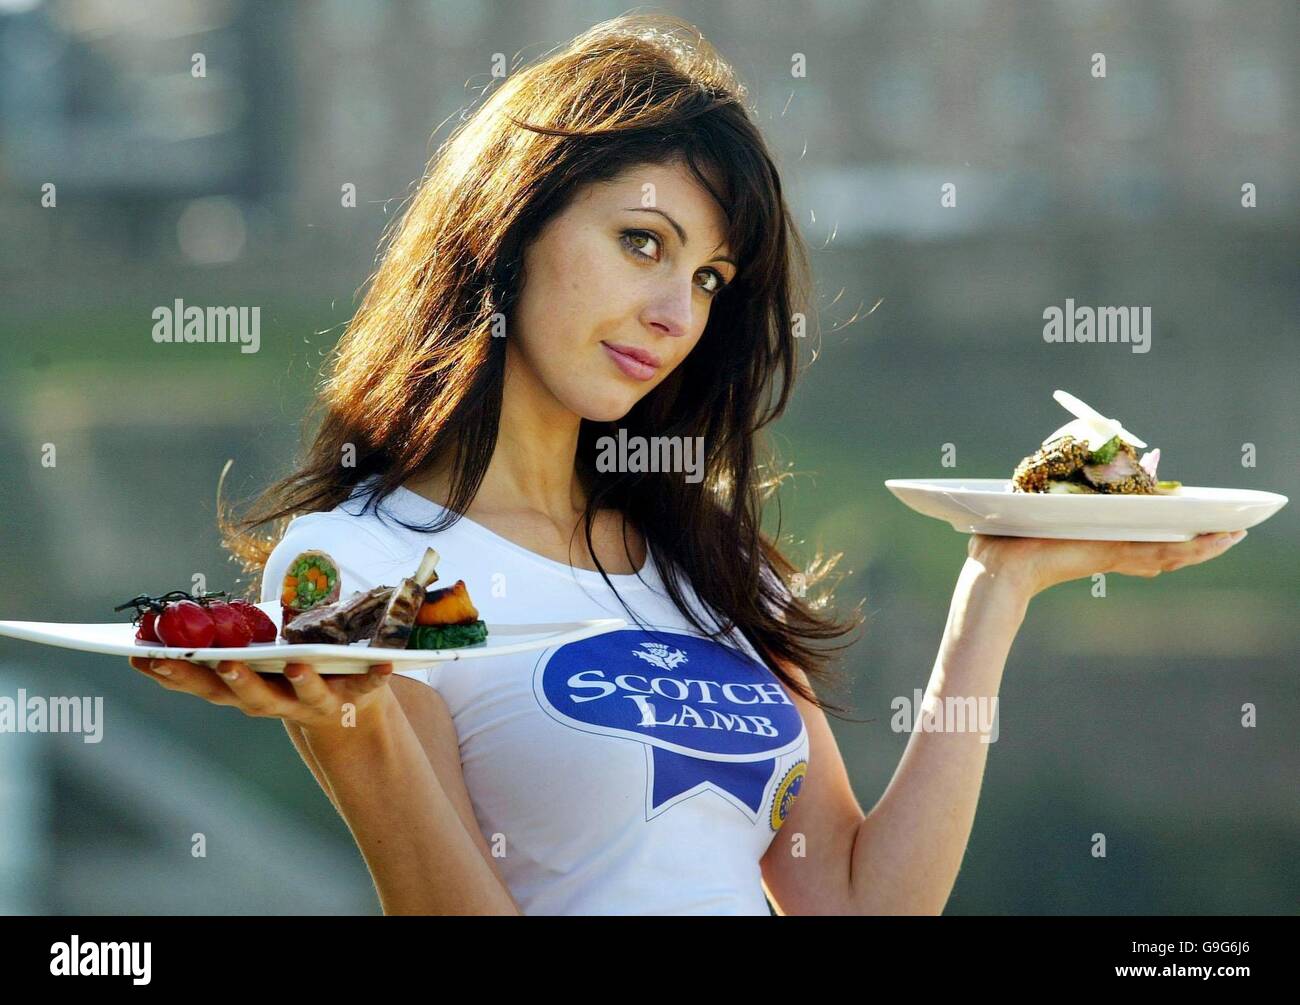 100,000 advertising campaign to promote Scotch Lamb during September, when the product is at its best. Stock Photo